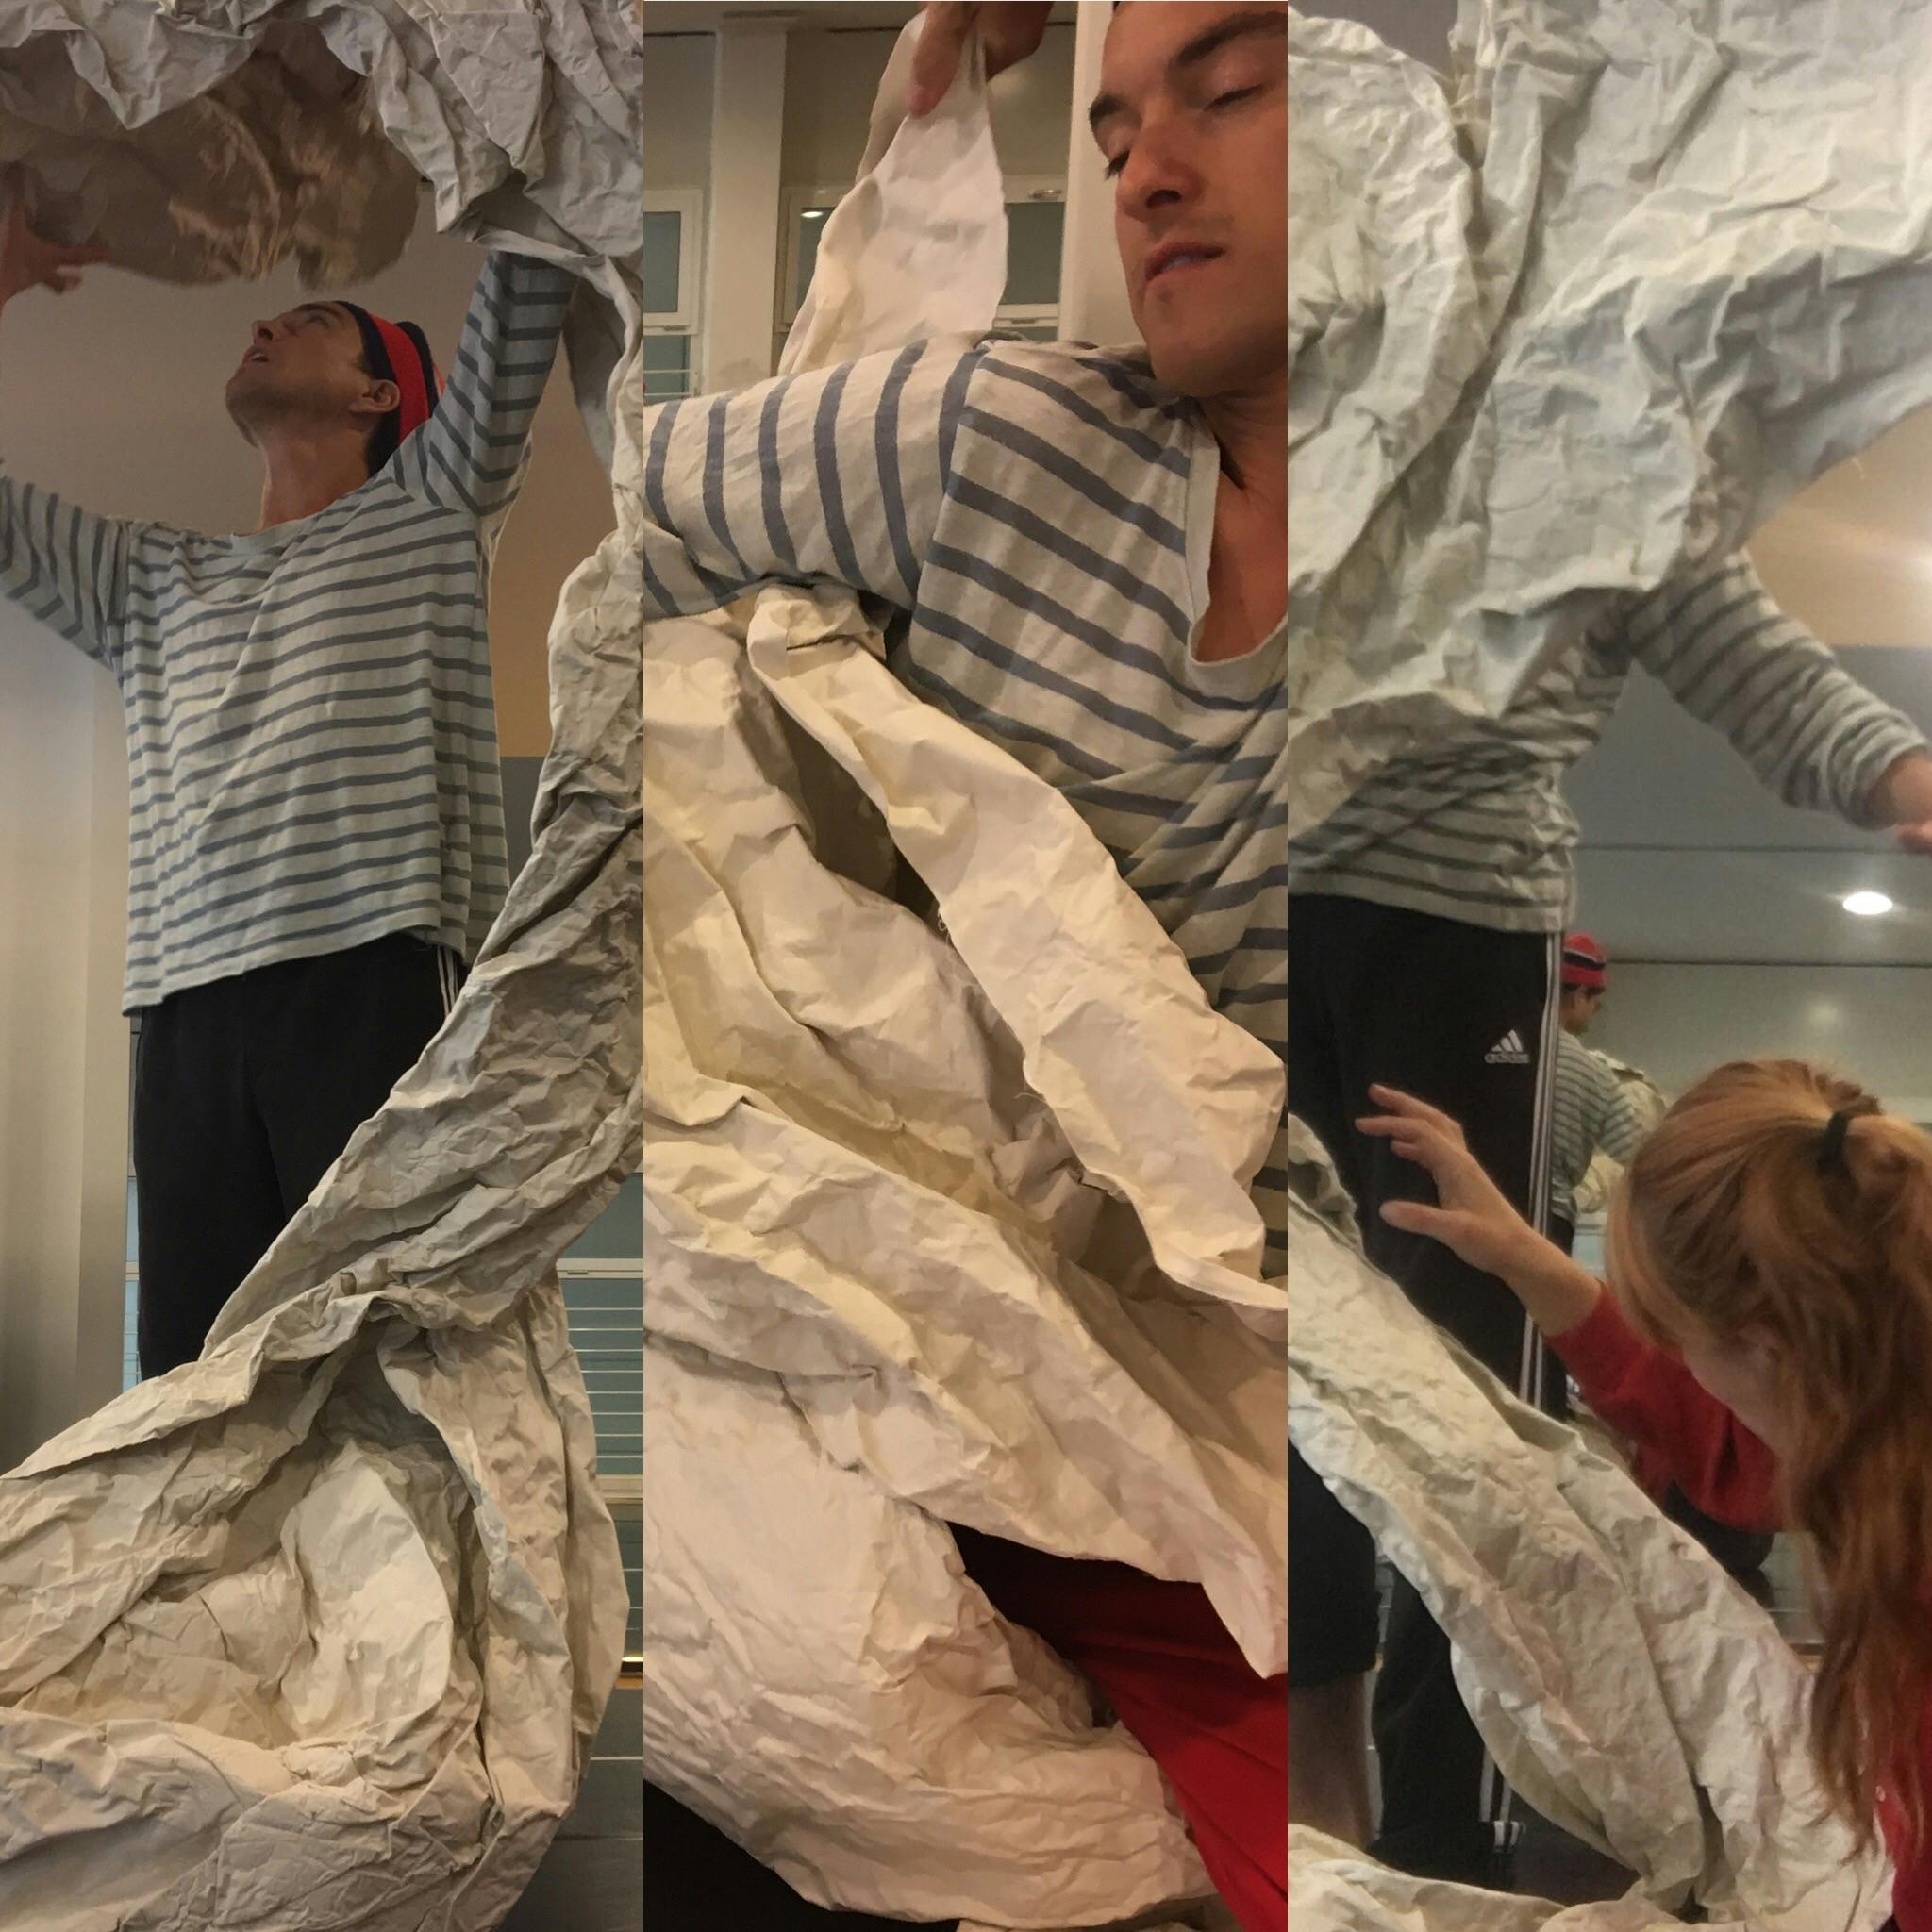 Vertical collage of three photographs depicting Sindri Runudde in various positions surrounded by large sheets of crumpled white paper.